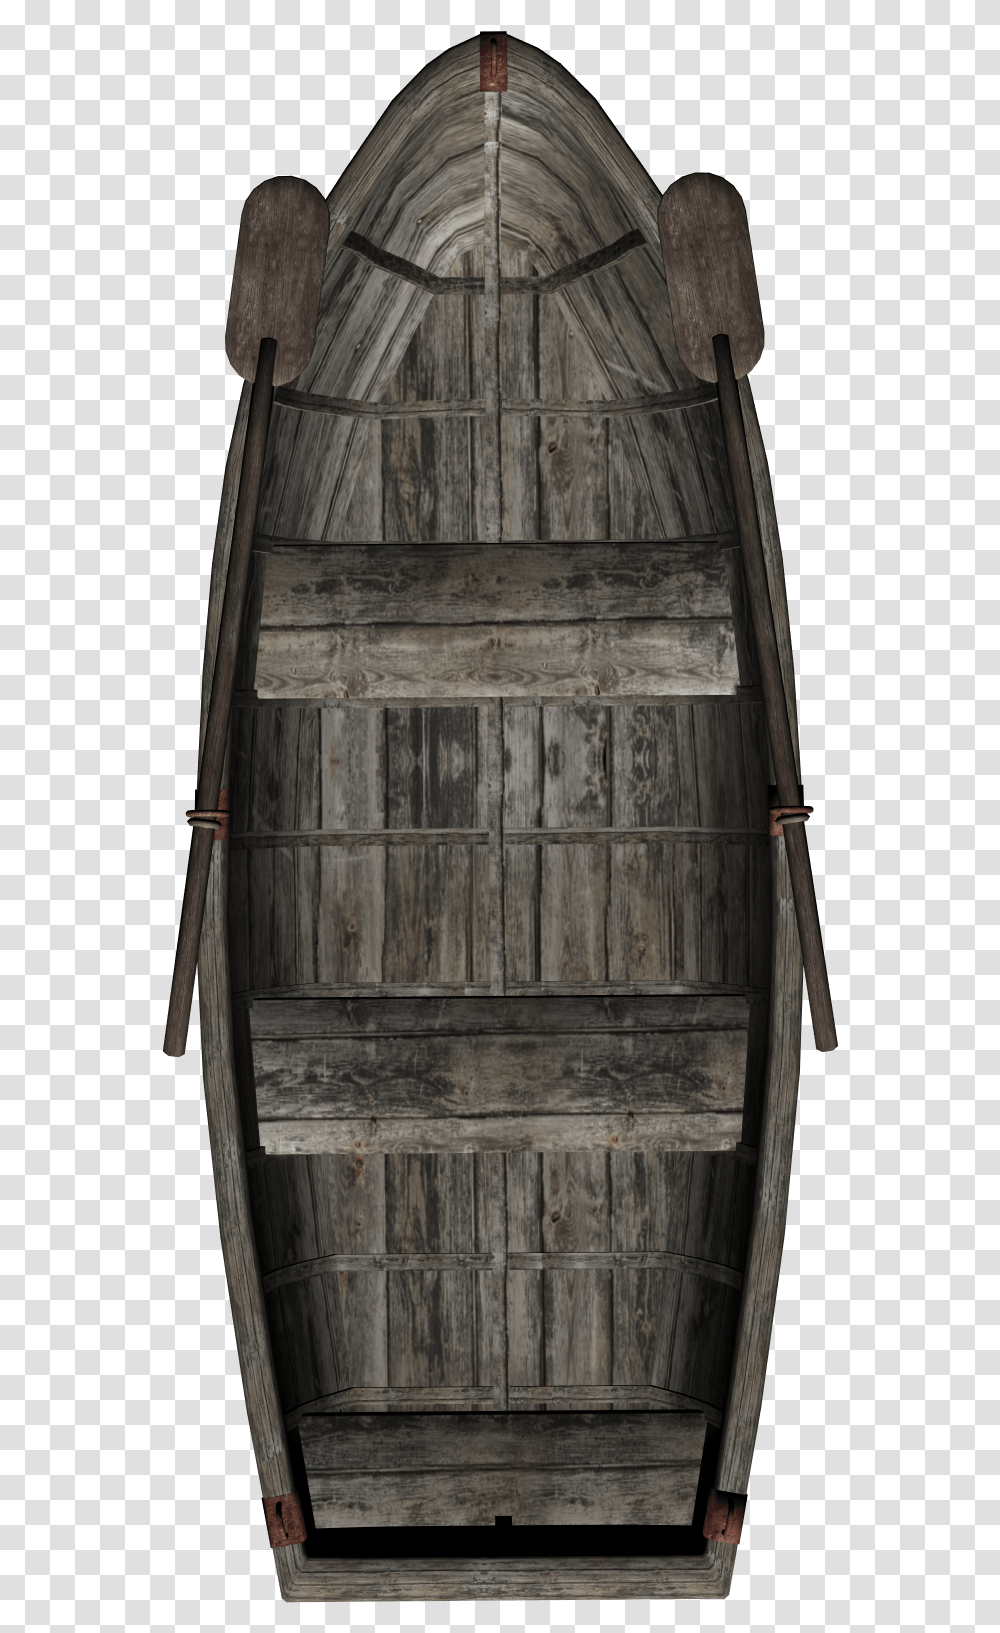 Row Boat Top Down View Miniature Gaming Objects Row Boat Top View, Door, Wood, Barrel, Box Transparent Png